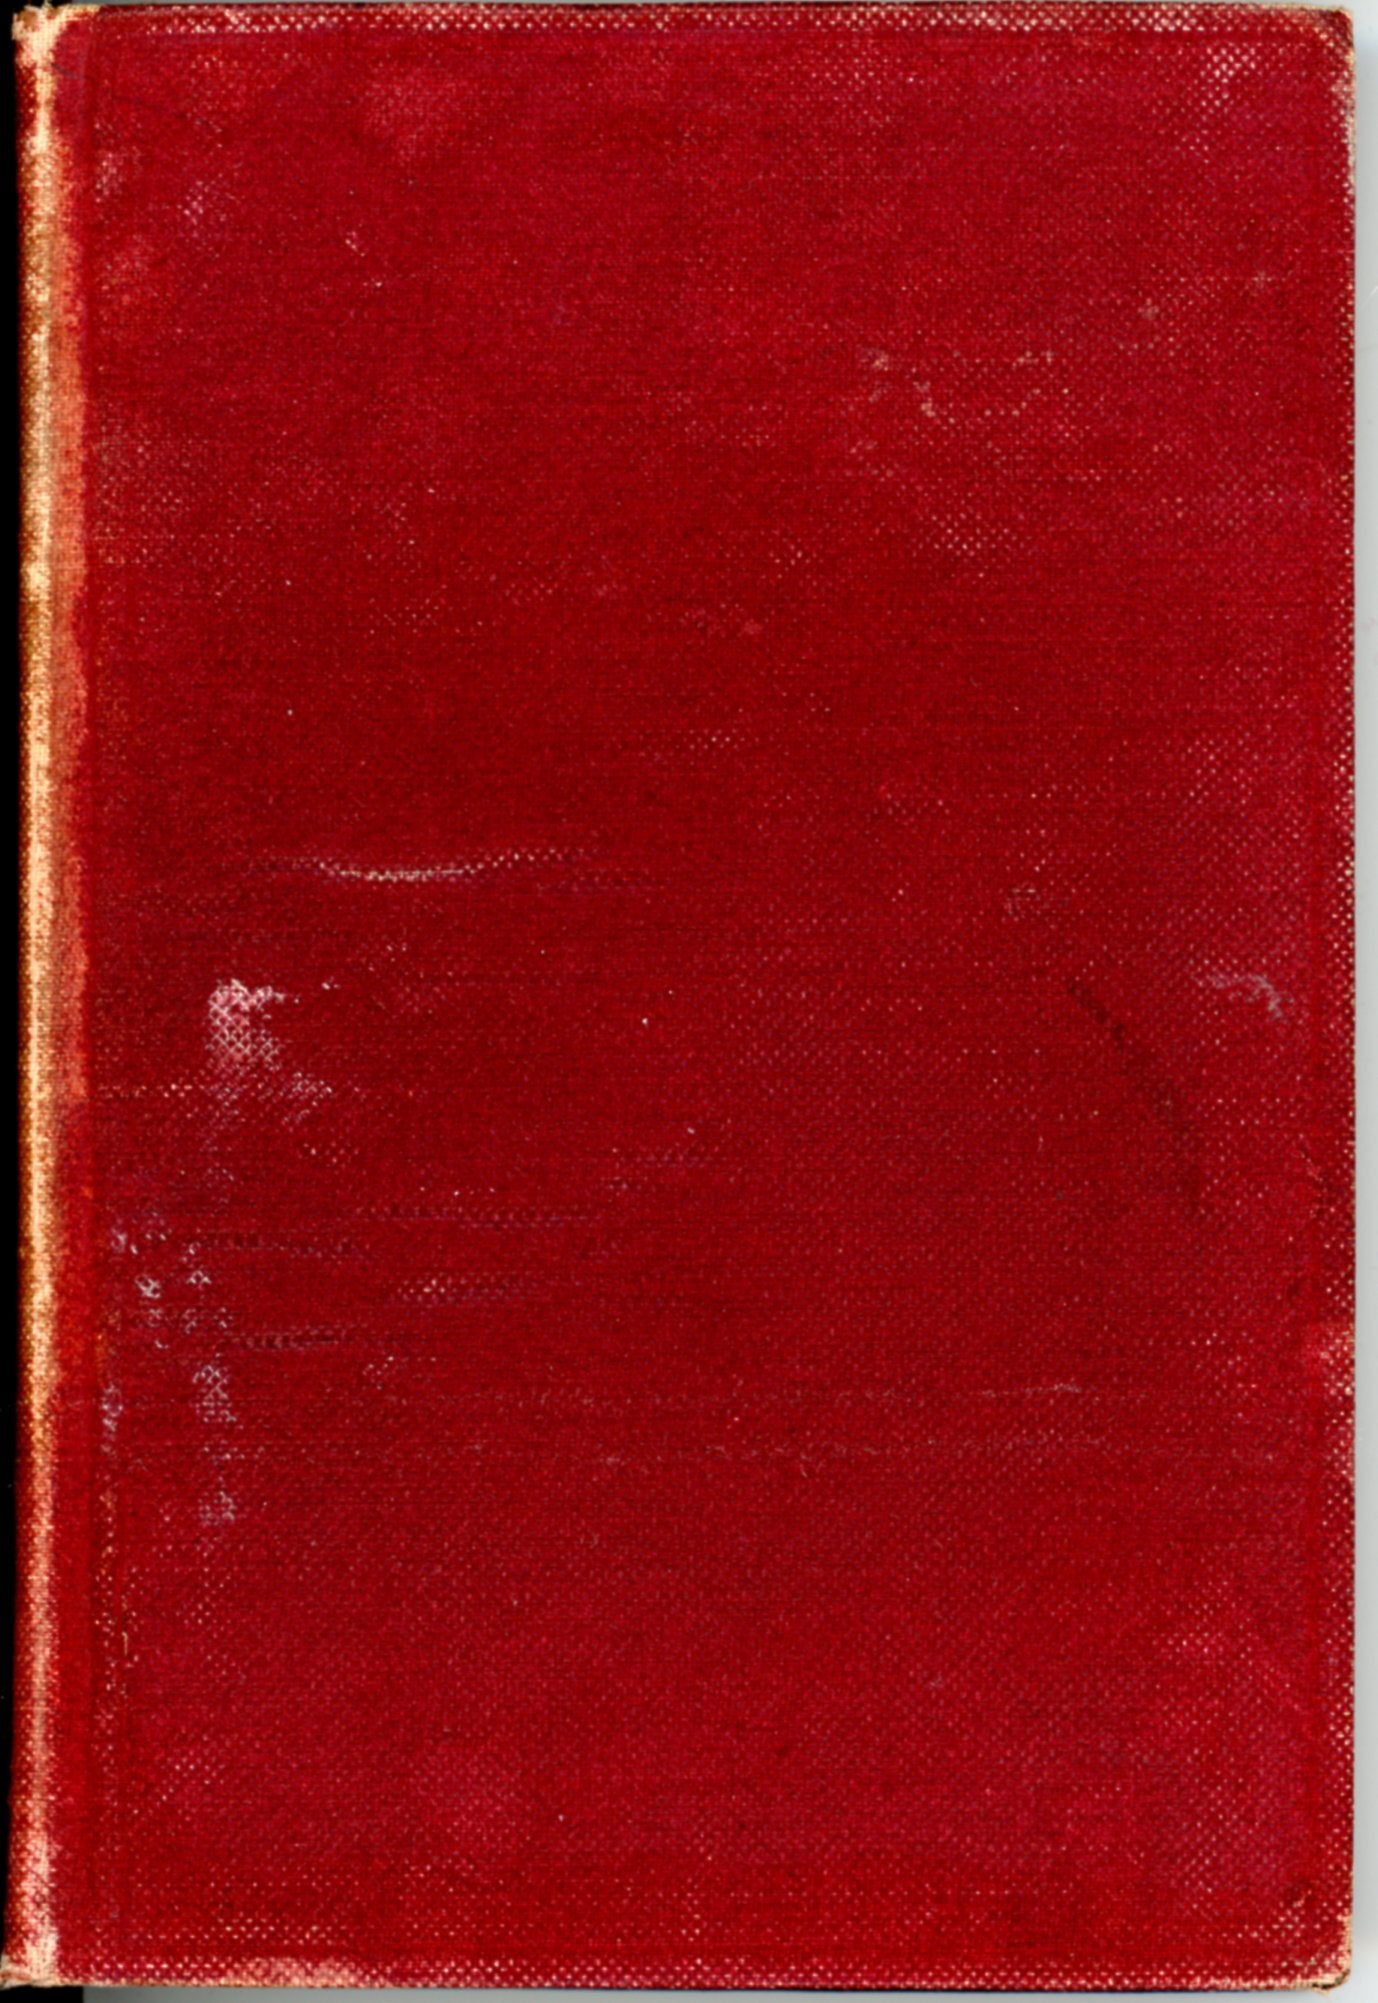 Handbook of Composition by Edwin C. Woolley ©1907 First Edition